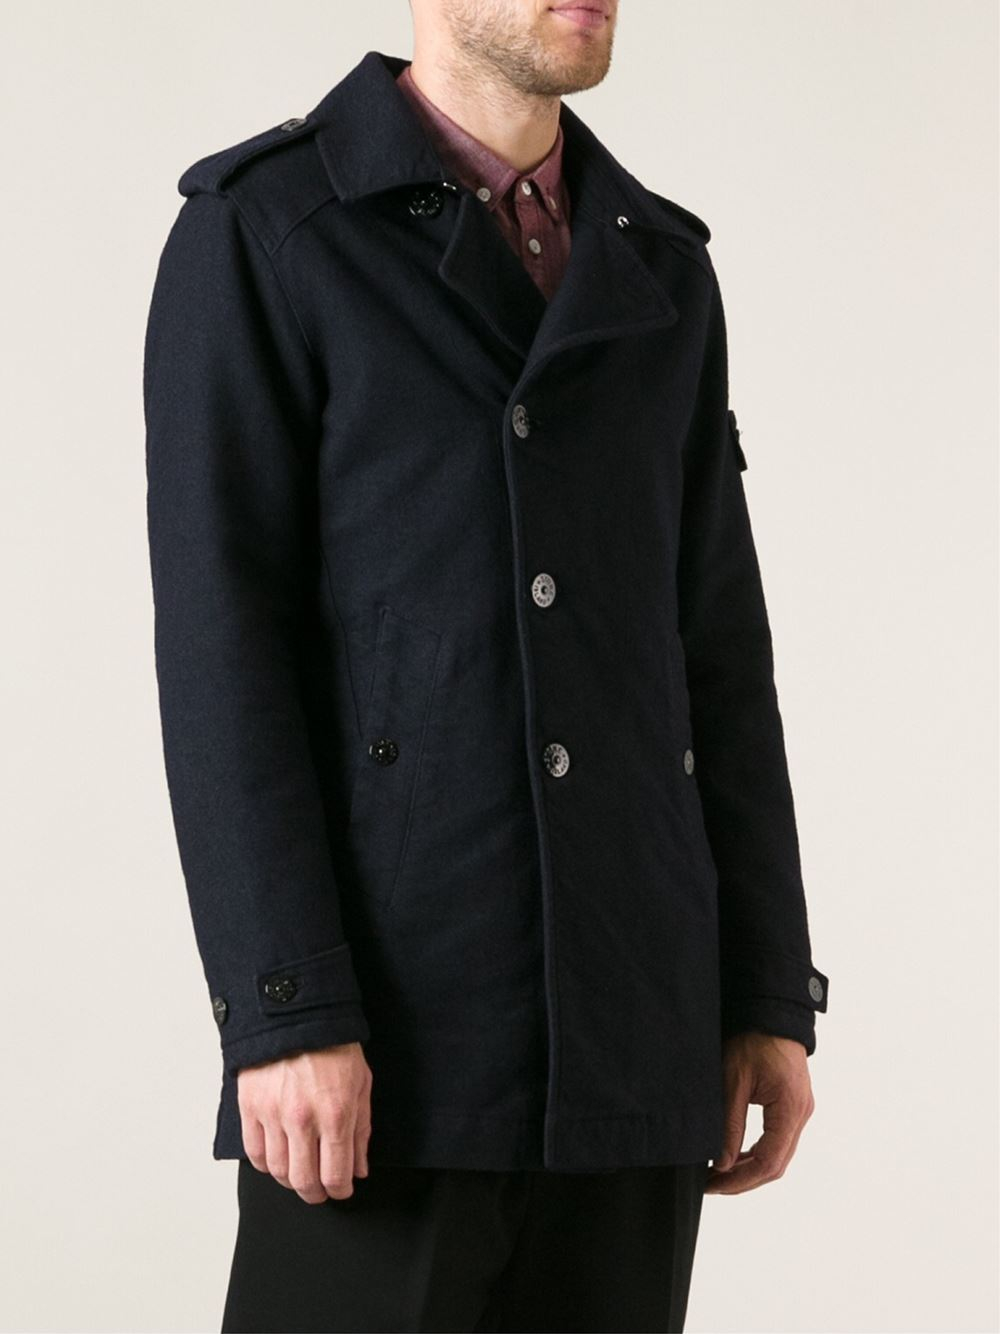 Stone Island Stylised Peacoat in Blue for Men - Lyst